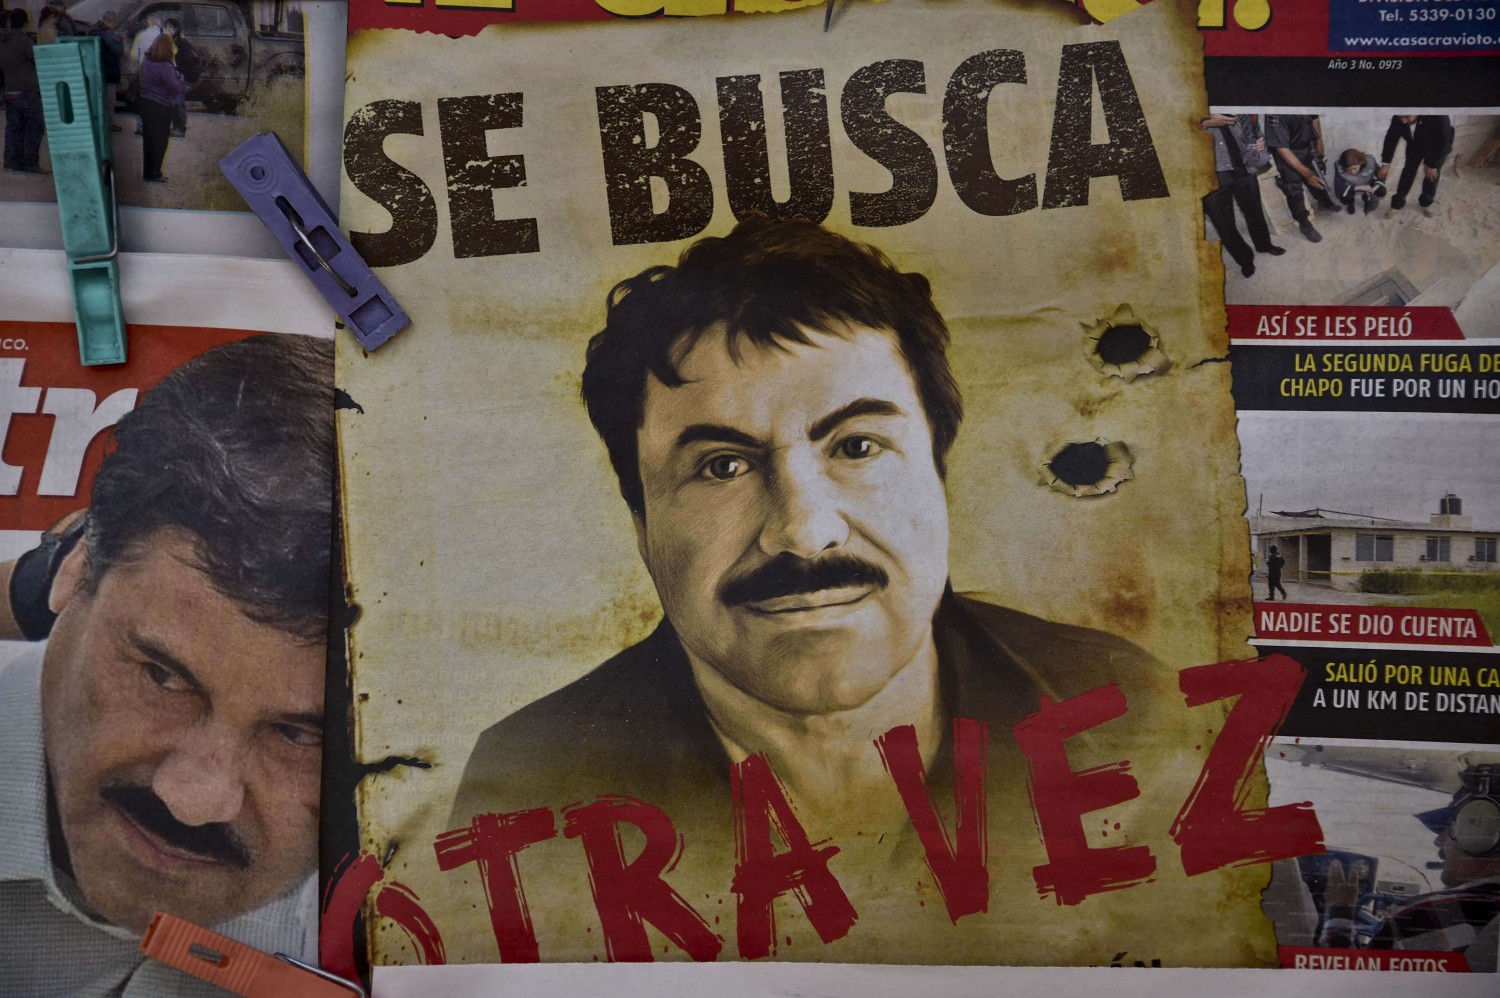 TOPSHOTS A poster with the face of Mexican drug lord Joaquin "El Chapo" Guzman, reading "Wanted, Again", is displayed at a newsstand in one Mexico City's major bus terminals on July 13, 2015, a day after the government informed of the escape of the drug kingpin from a maximum-security prison. Mexican security forces scrambled Monday to save face and recapture "El Chapo" as authorities investigated whether guards helped him escape prison through a tunnel under his cell.   AFP PHOTO / YURI CORTEZ